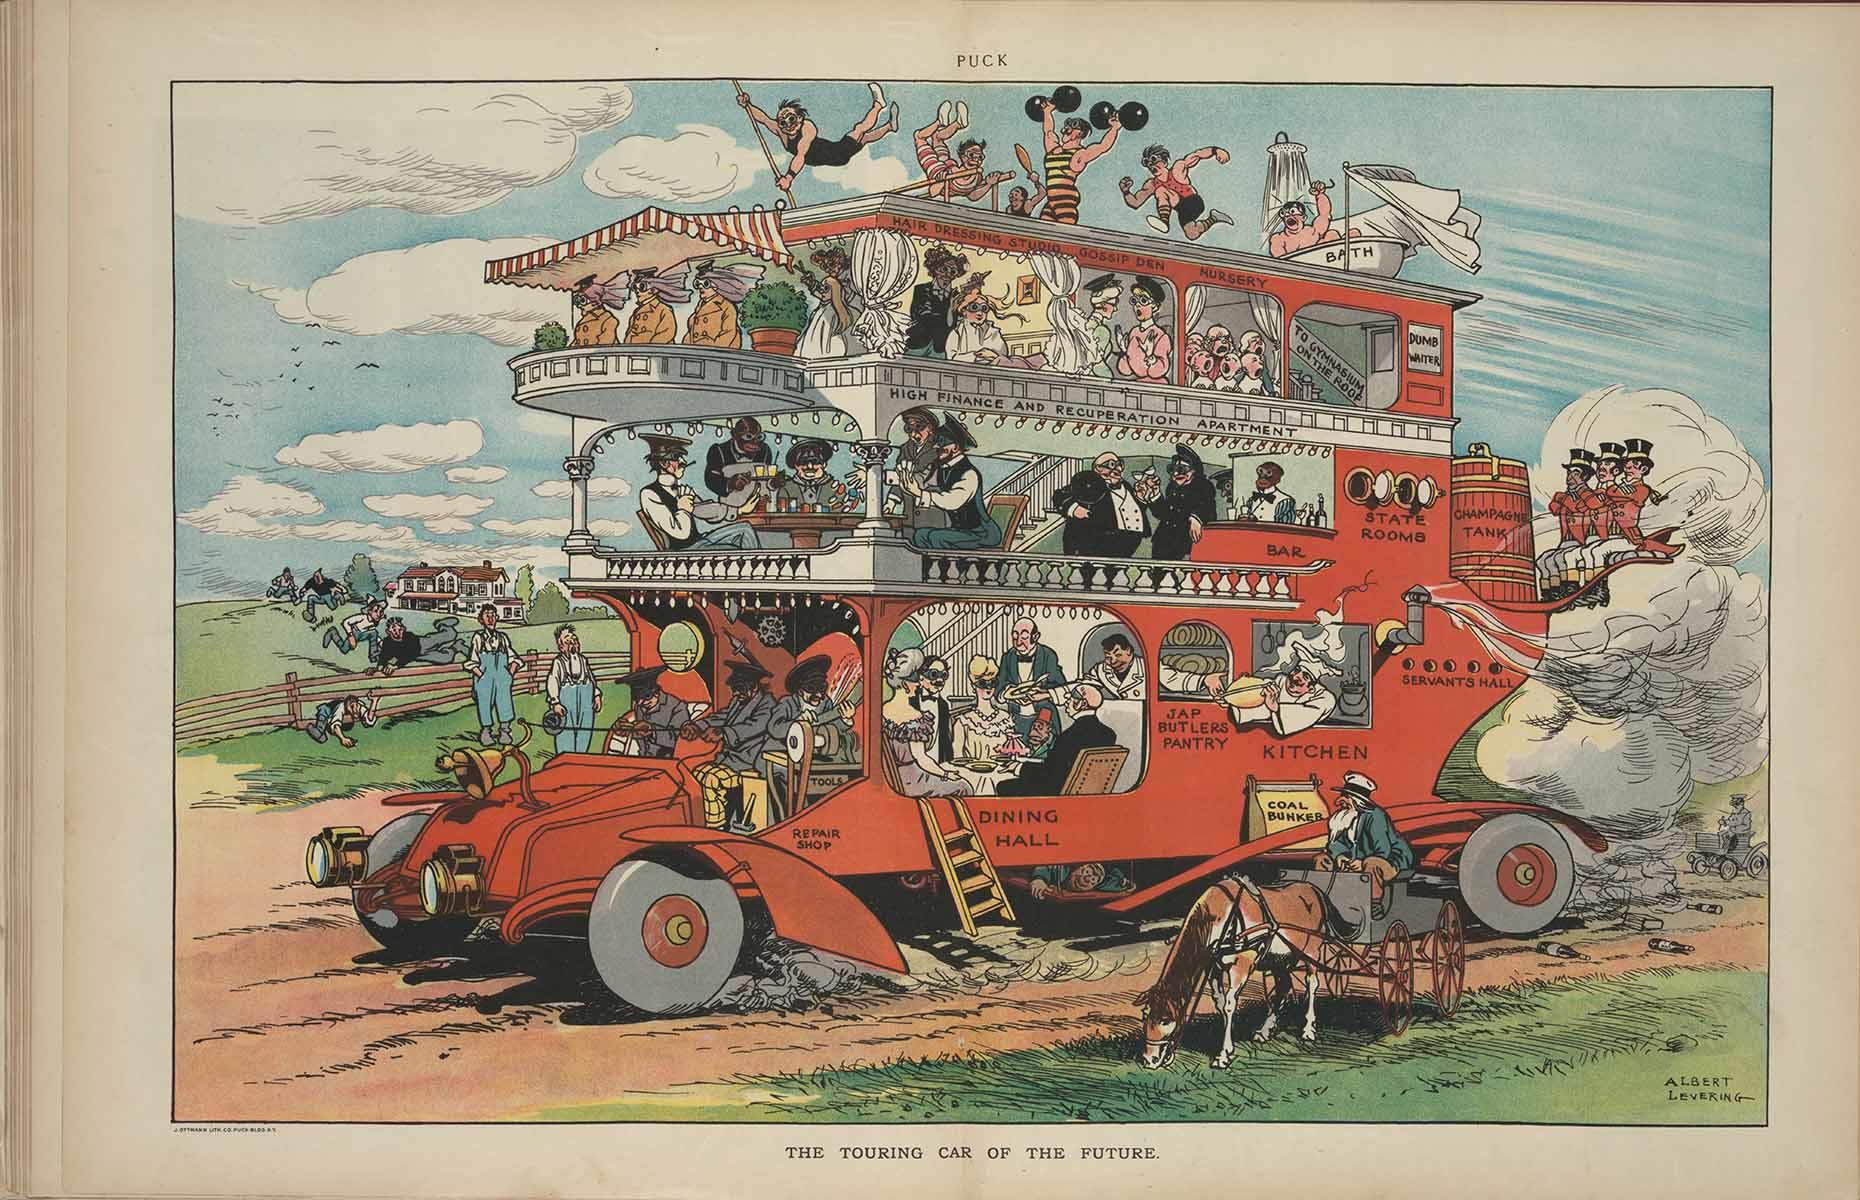 <p>Fast-forward to the turn of the century and automobile manufacturing was increasing steadily. Couple that with wealthy Americans' increasing appetite for travel across the States and US travelers were in need of a new breed of motorcar. This 1905 sketch by Albert Levering – titled "The touring car of the future" – is tongue-in-cheek, but it signals a want for a new vehicle that offers explorers everything they need on the road.</p>